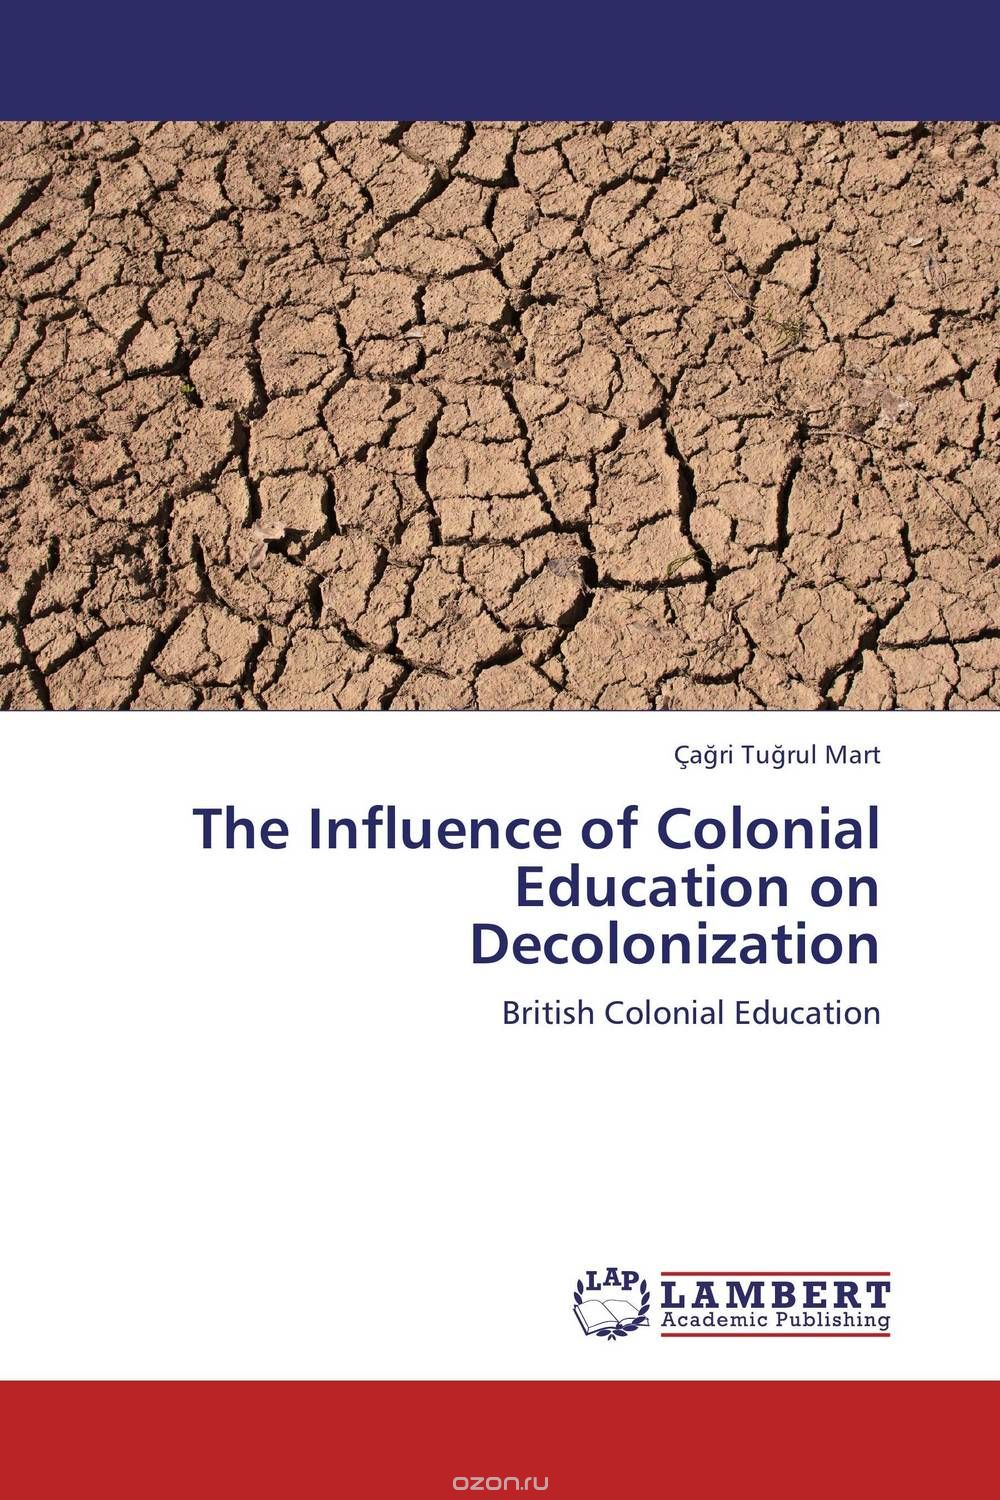 The Influence of Colonial Education on Decolonization